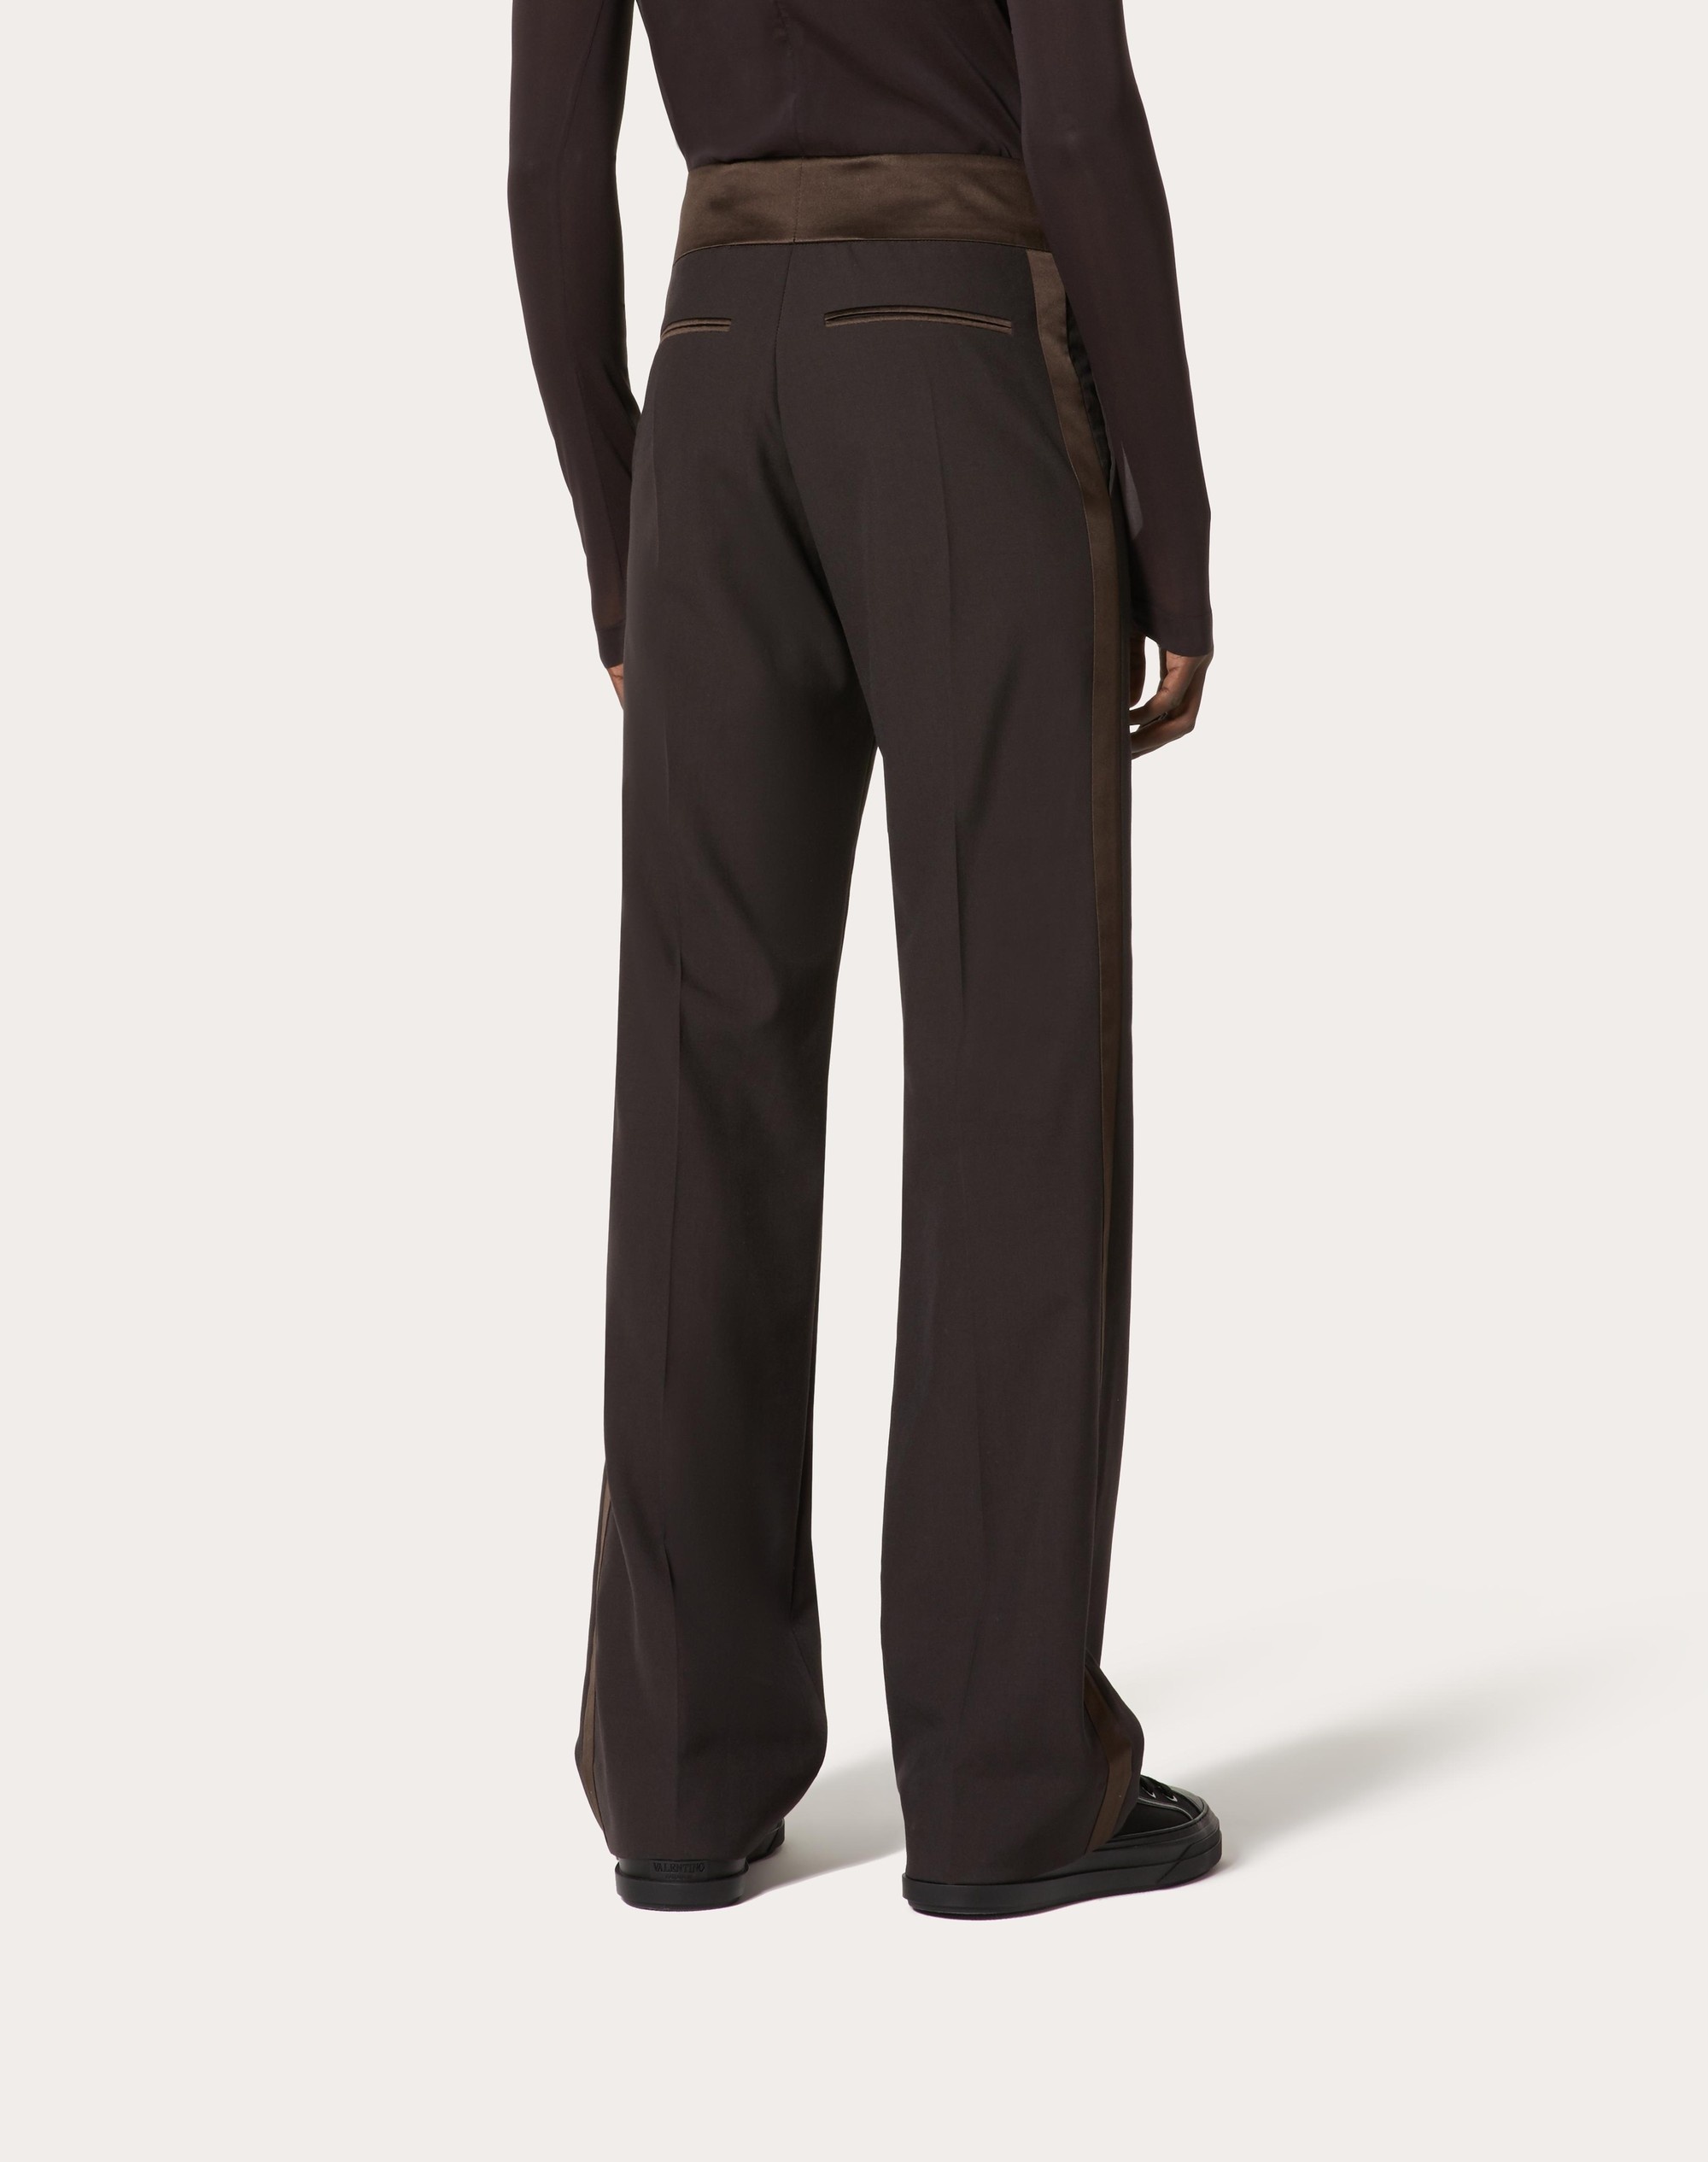 WOOL PANTS WITH BELT AND SATIN SIDE BANDS - 4